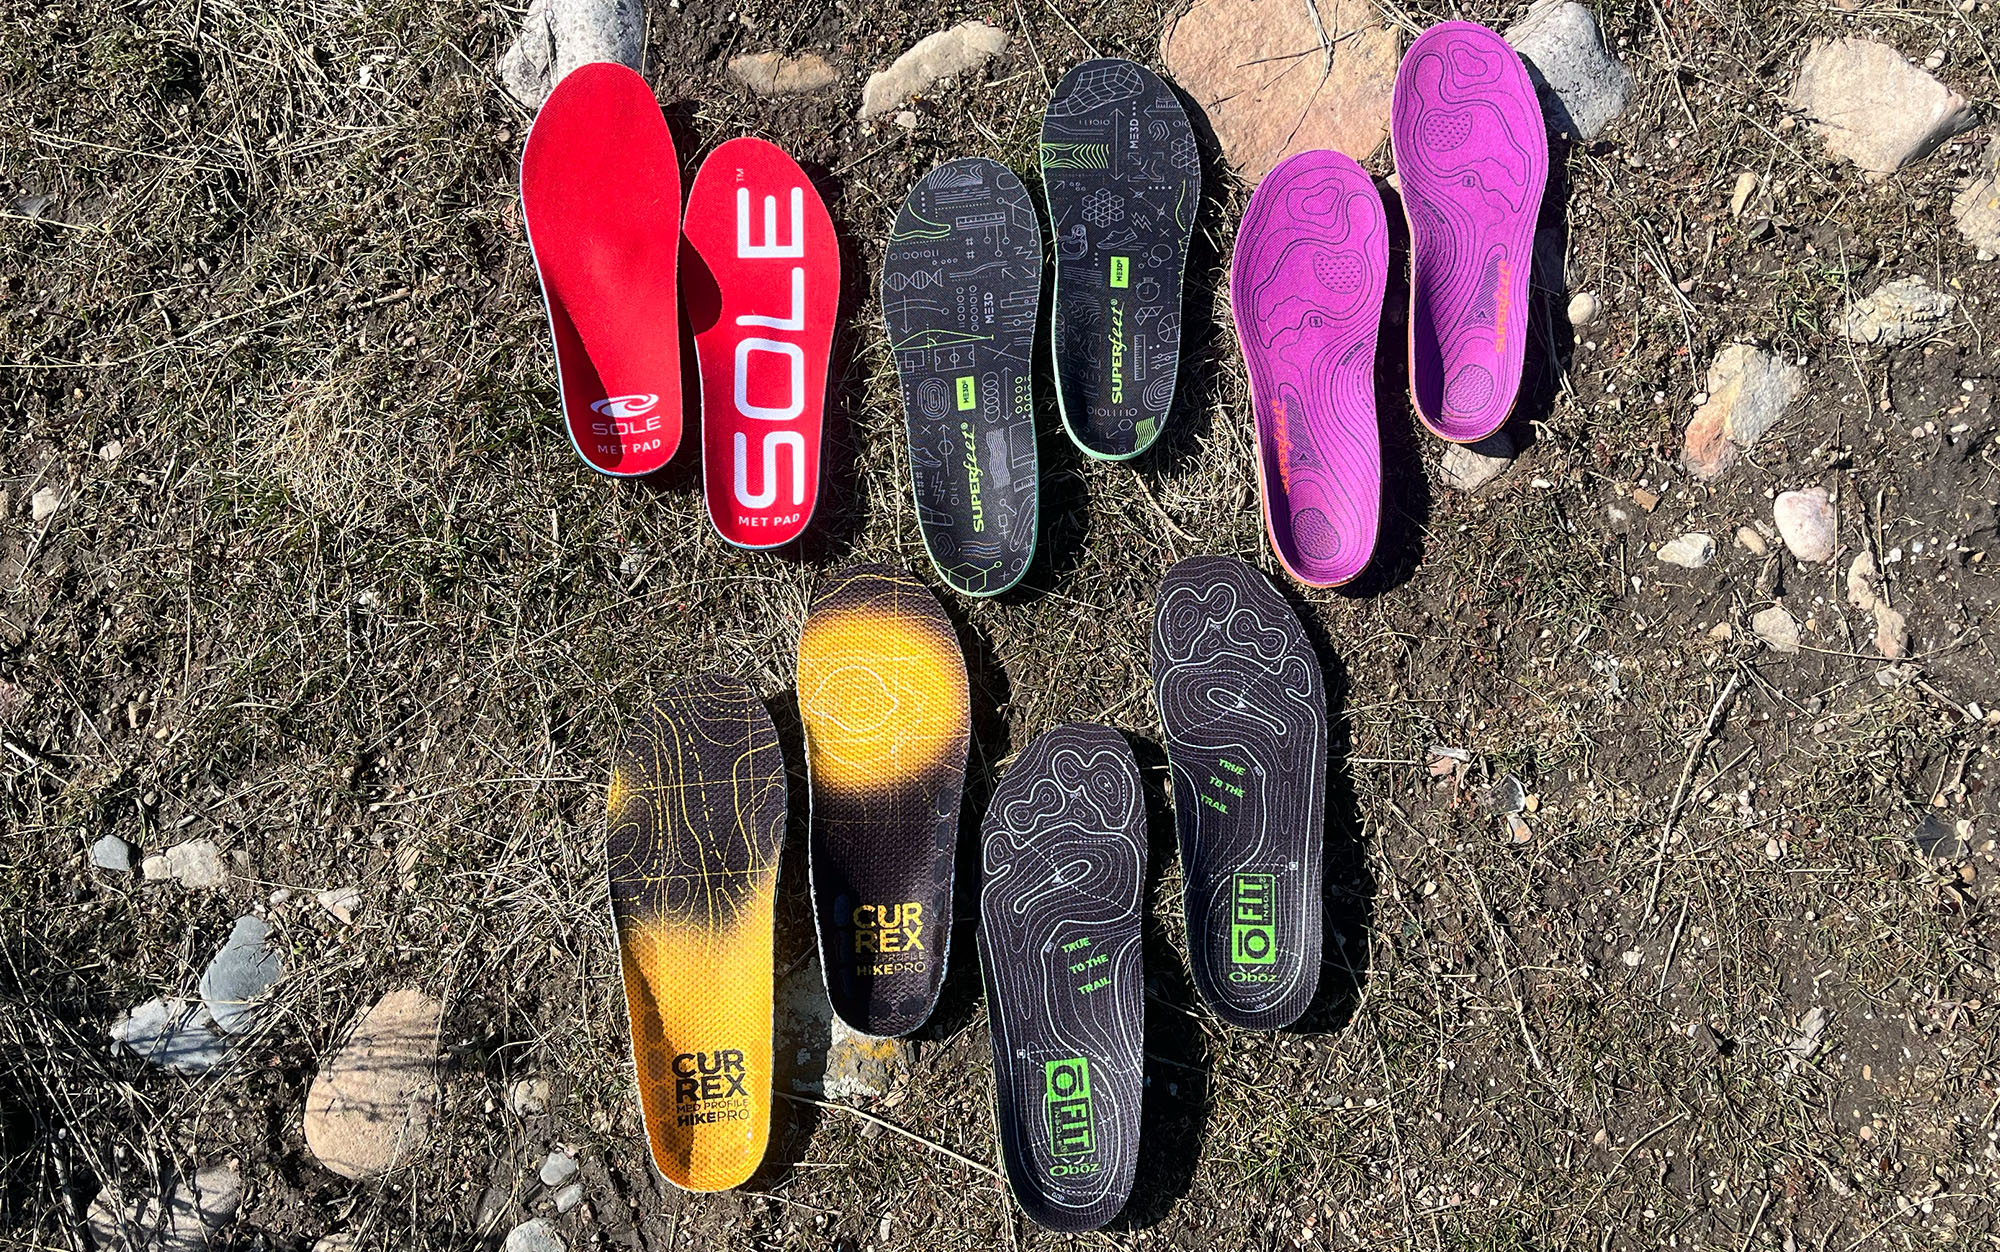 There are a lot of variables to account for with insoles, but the comfort is worth the trial and error.